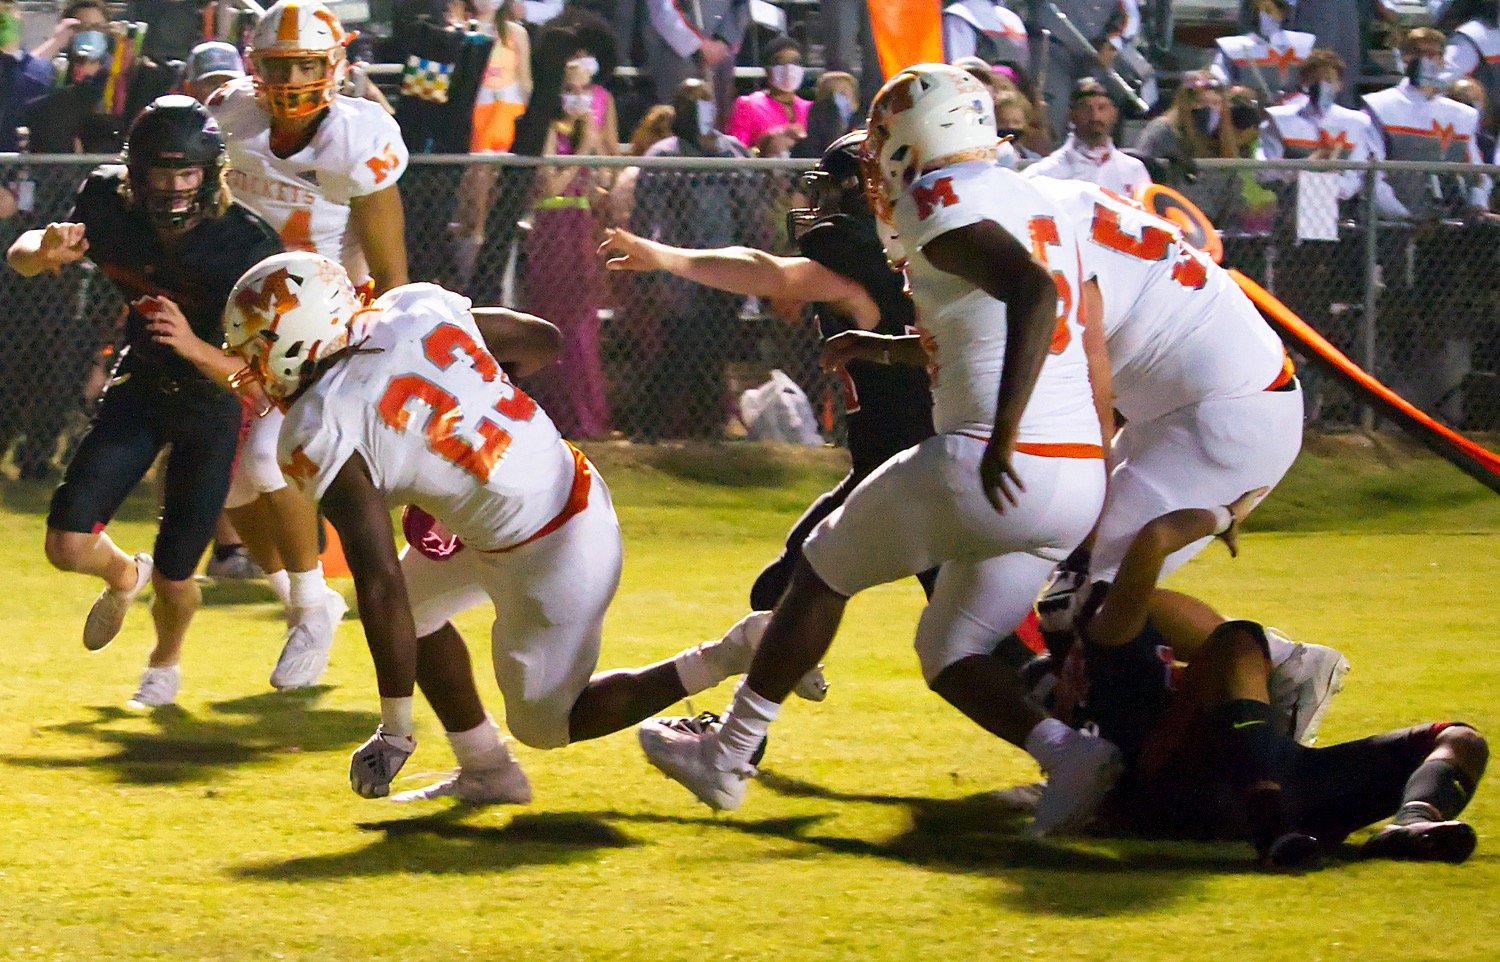 Trevion Sneed (23) keeps his balance several yards out from the endzone, just before putting the Yellowjackets on the scoreboard Friday in Winnsboro.